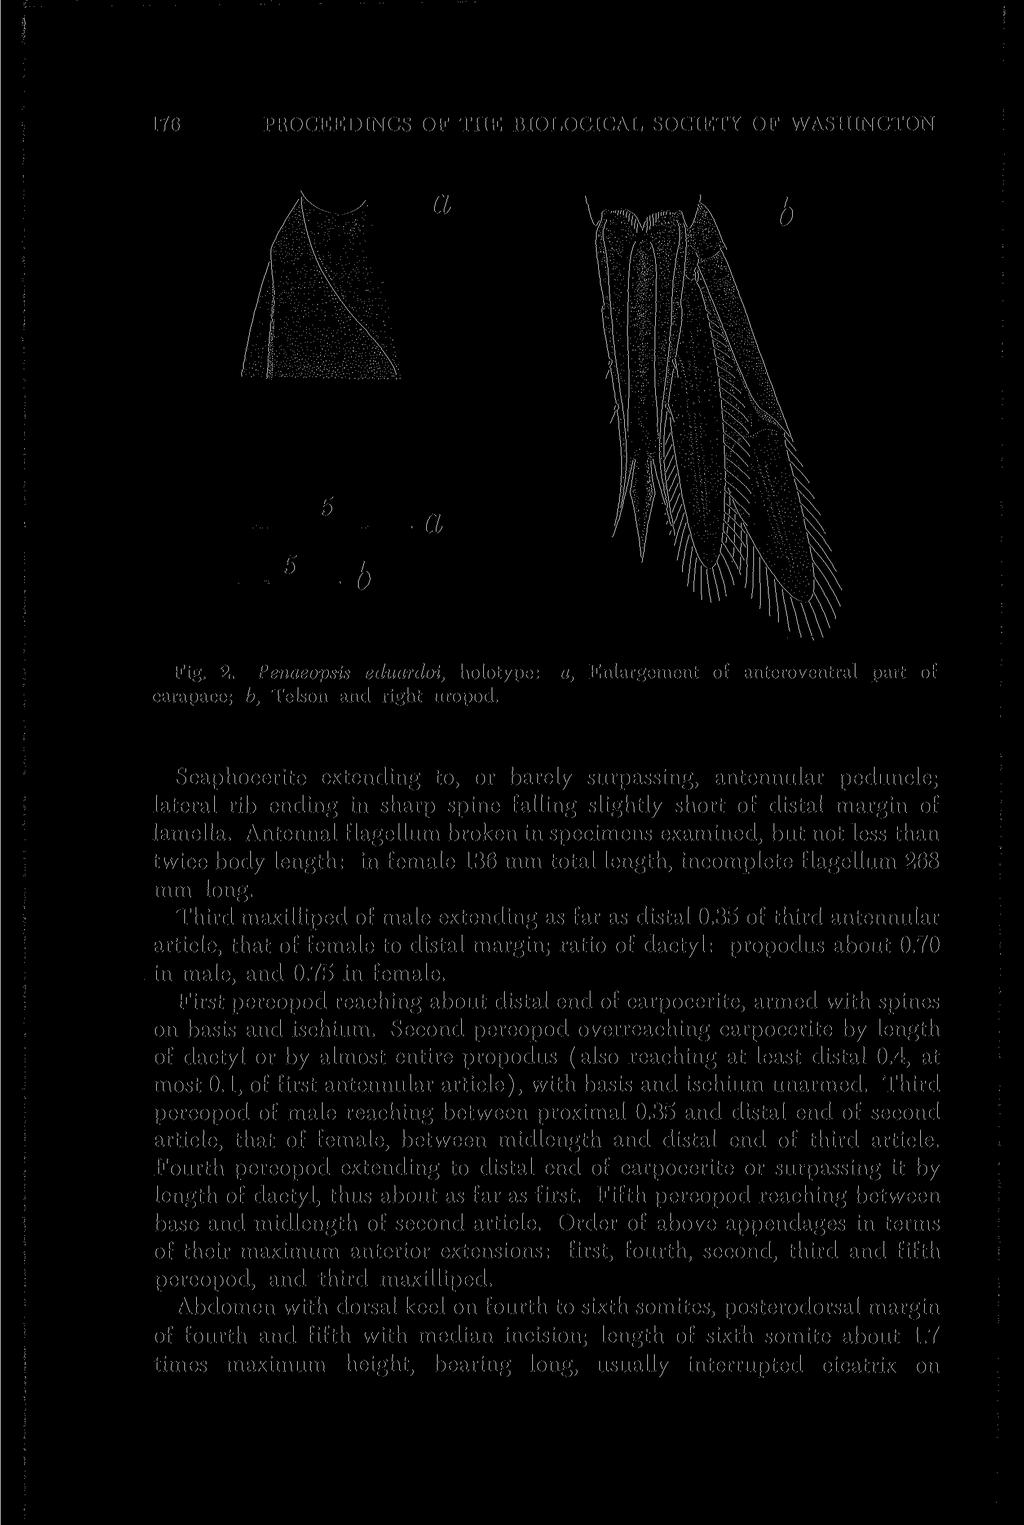 176 PROCEEDINGS OF THE BIOLOGICAL SOCIETY OF WASHINGTON a 5 a 5 b Fig. 2. Penaeopsis eduardoi, holotype: a, Enlargement of anteroventral part of carapace; b, Telson and right uropod.